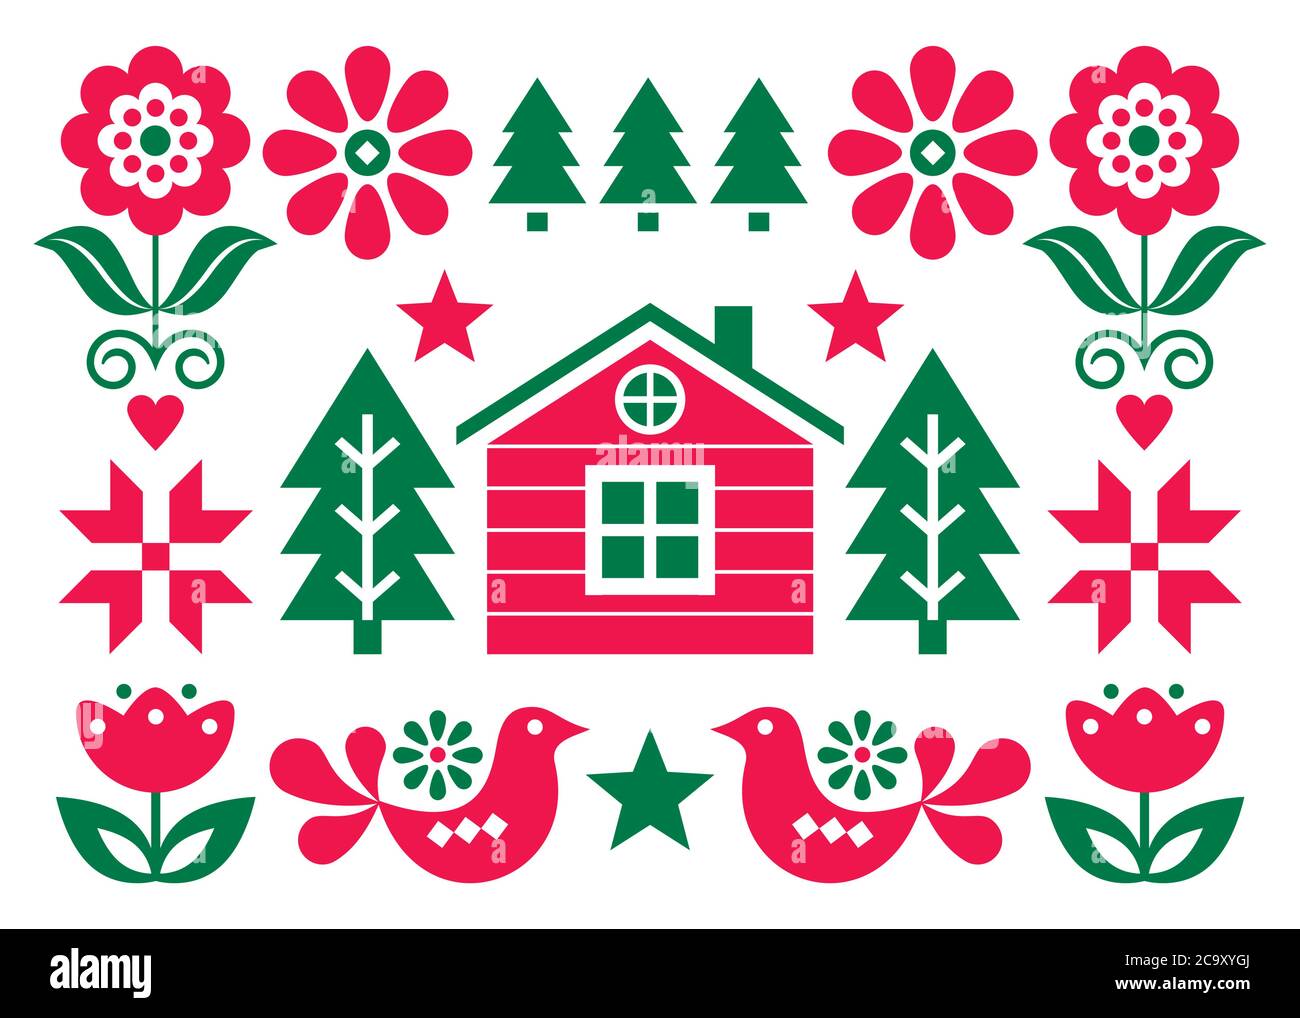 Christmas Scandinavian folk art vector greeting card design in red and green in 5x7 format with Christmas trees, birds, flowers and Finnish house Stock Vector